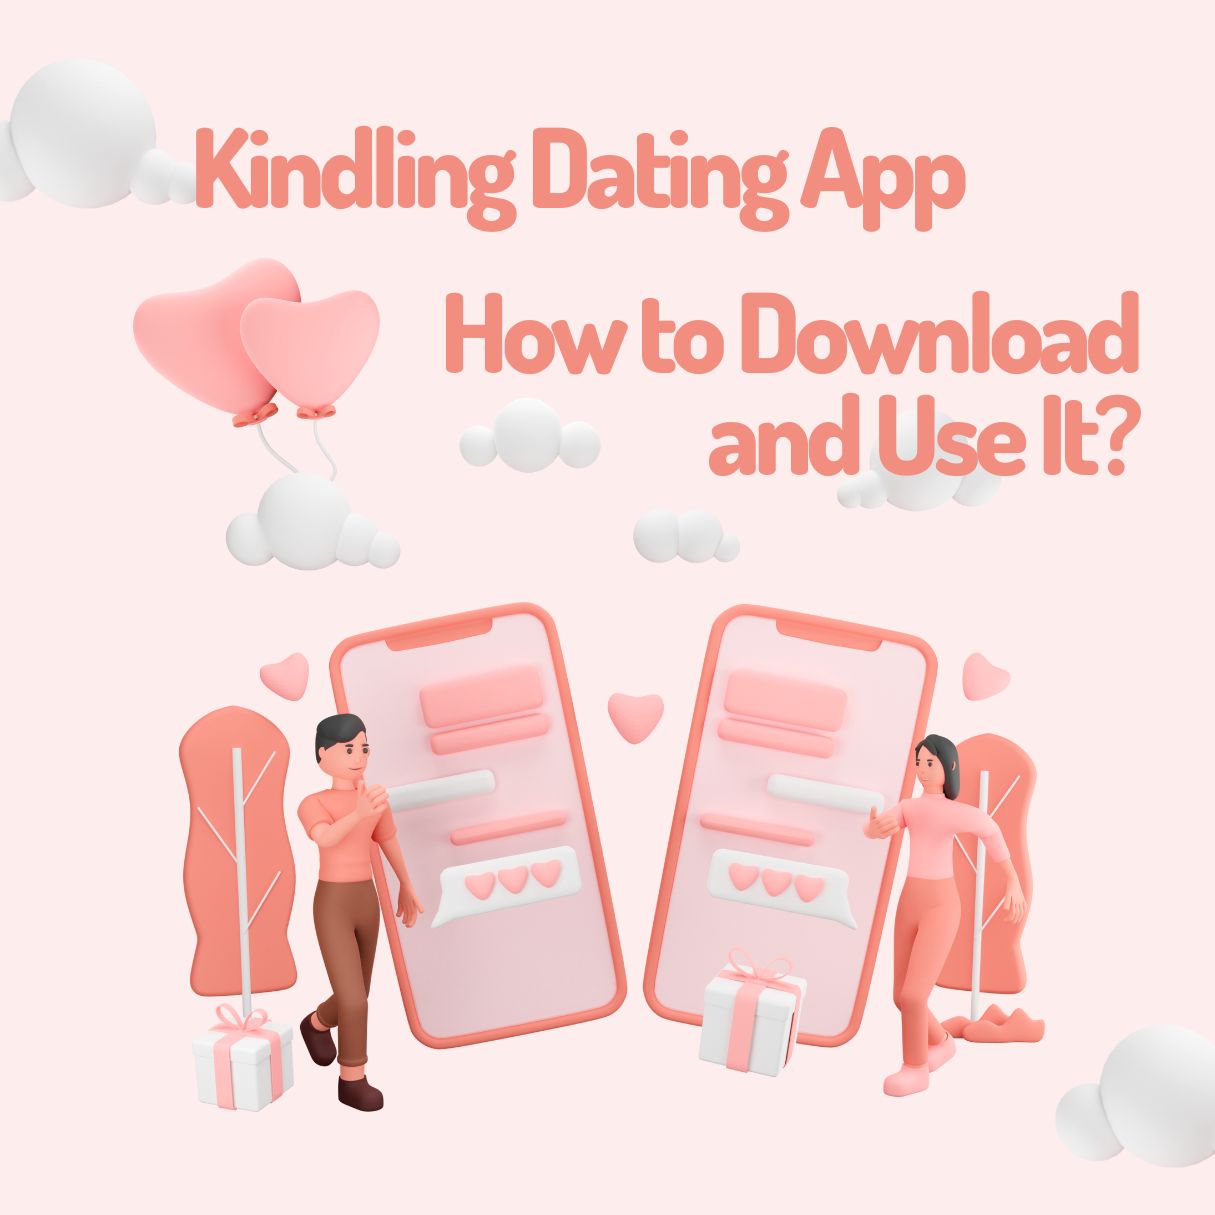 Kindling Dating App How to Download and Use It